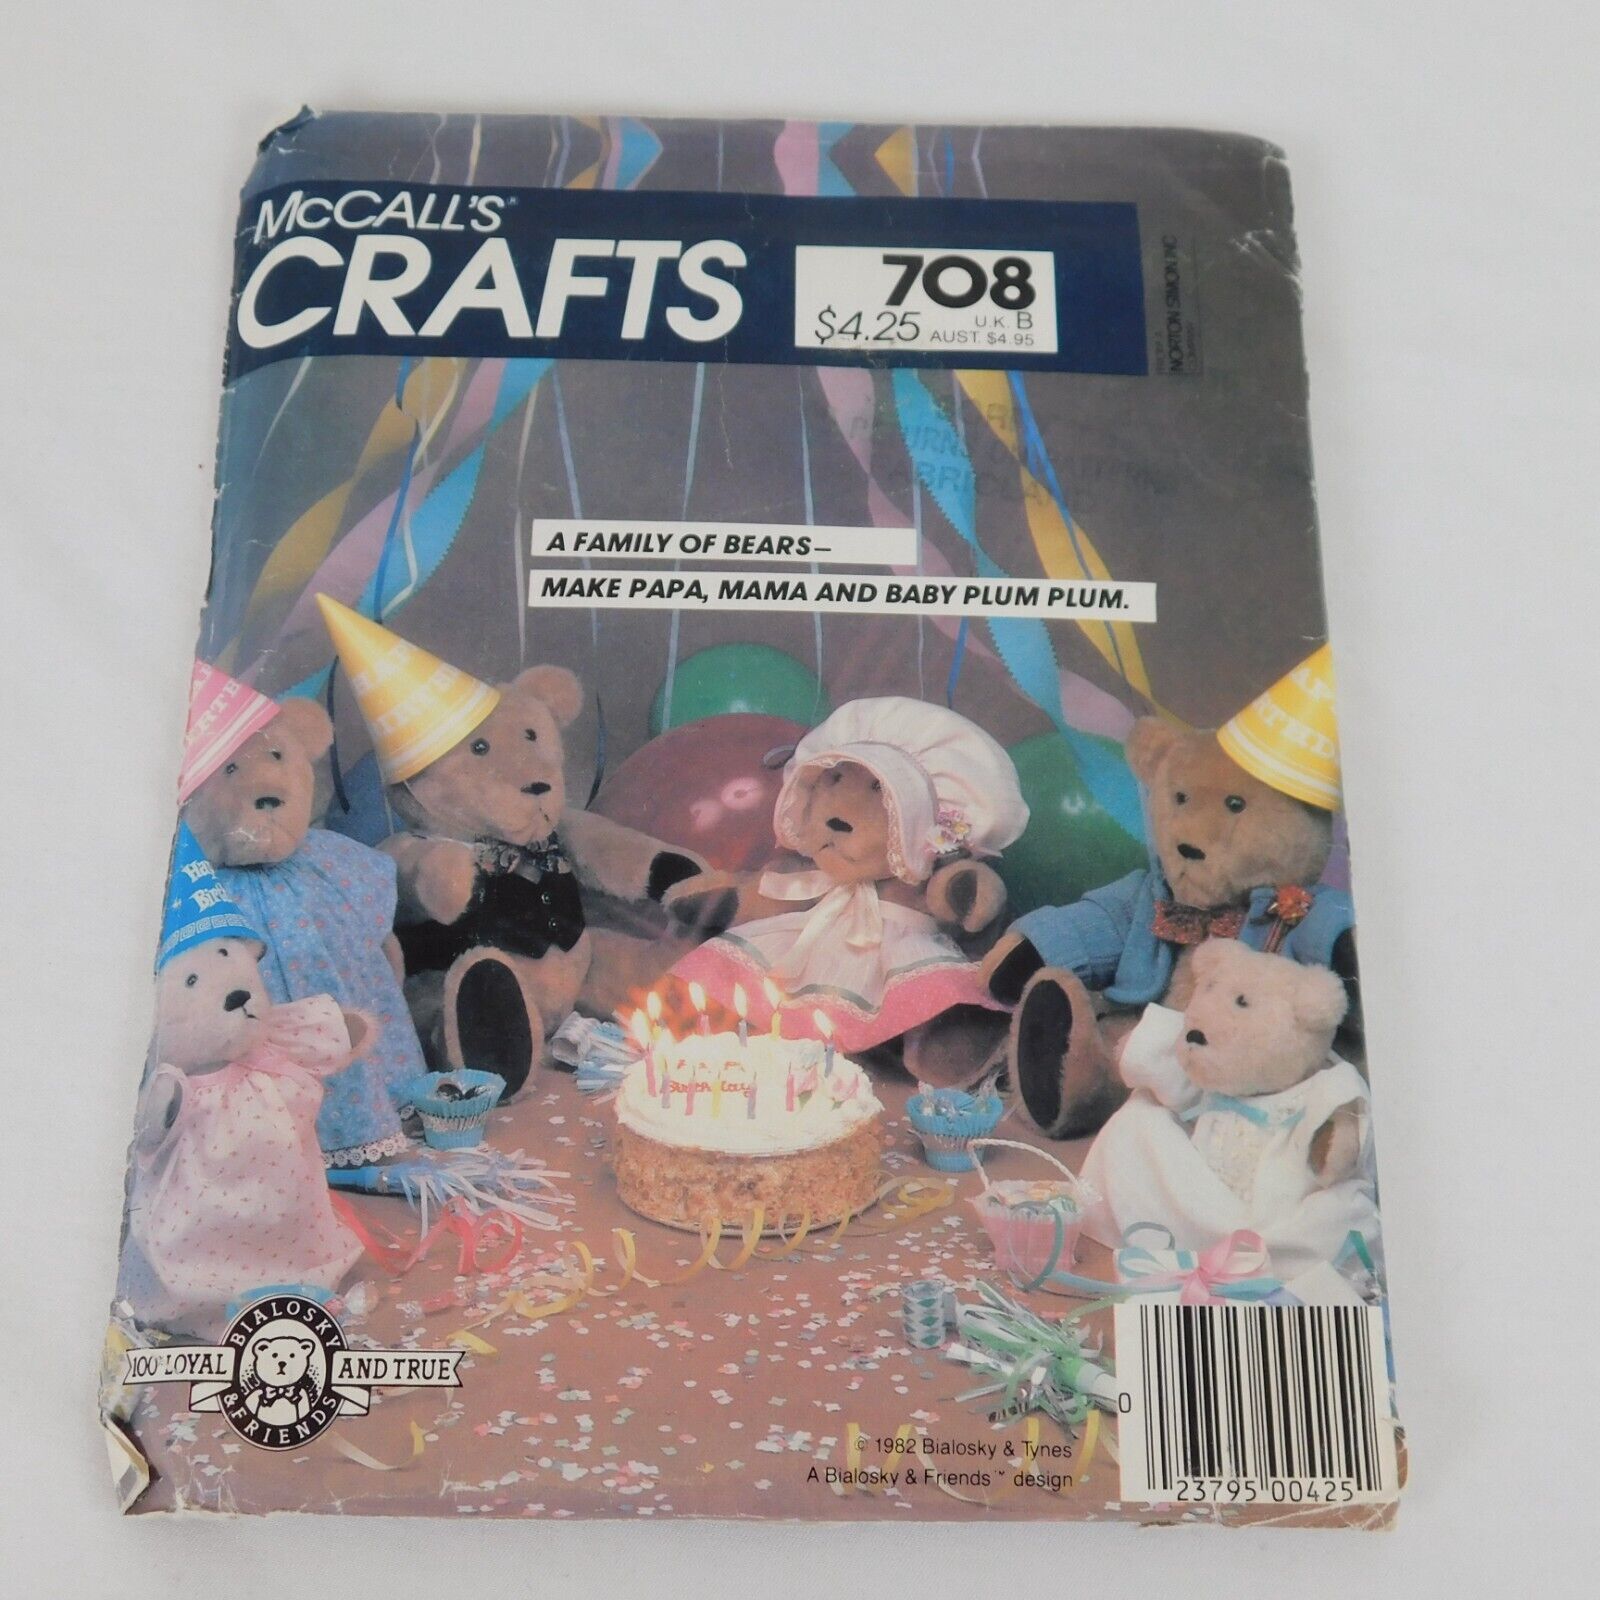 McCalls Crafts 708 Sewing Pattern Family Of Bialosky Bears Uncut Vintage 1983 - $7.85